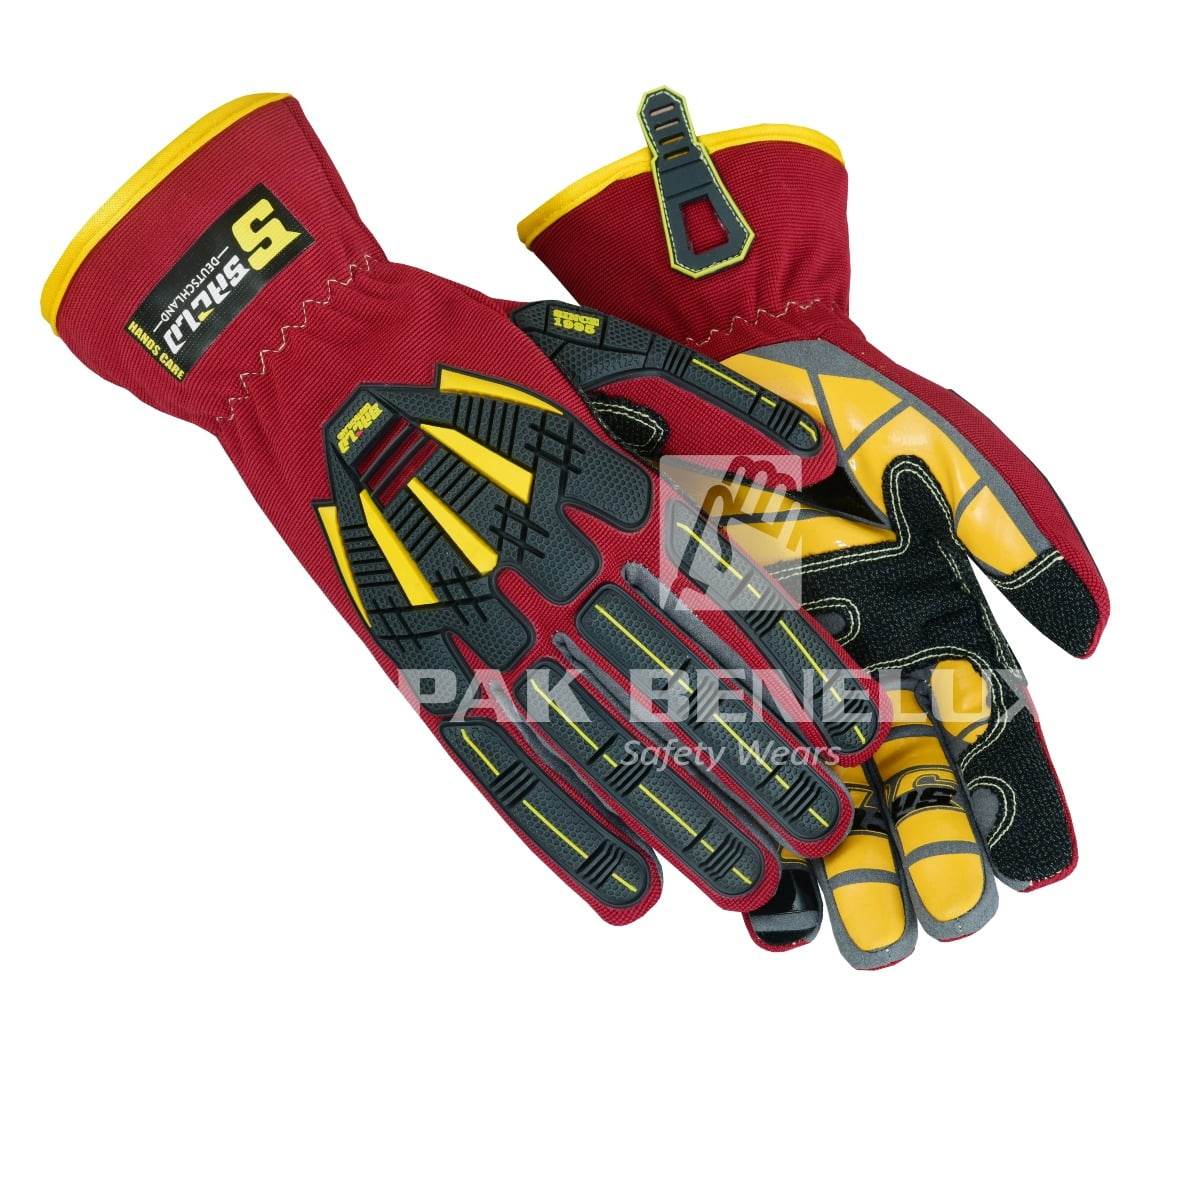 Extrication gloves Manufacturer in Pakistan